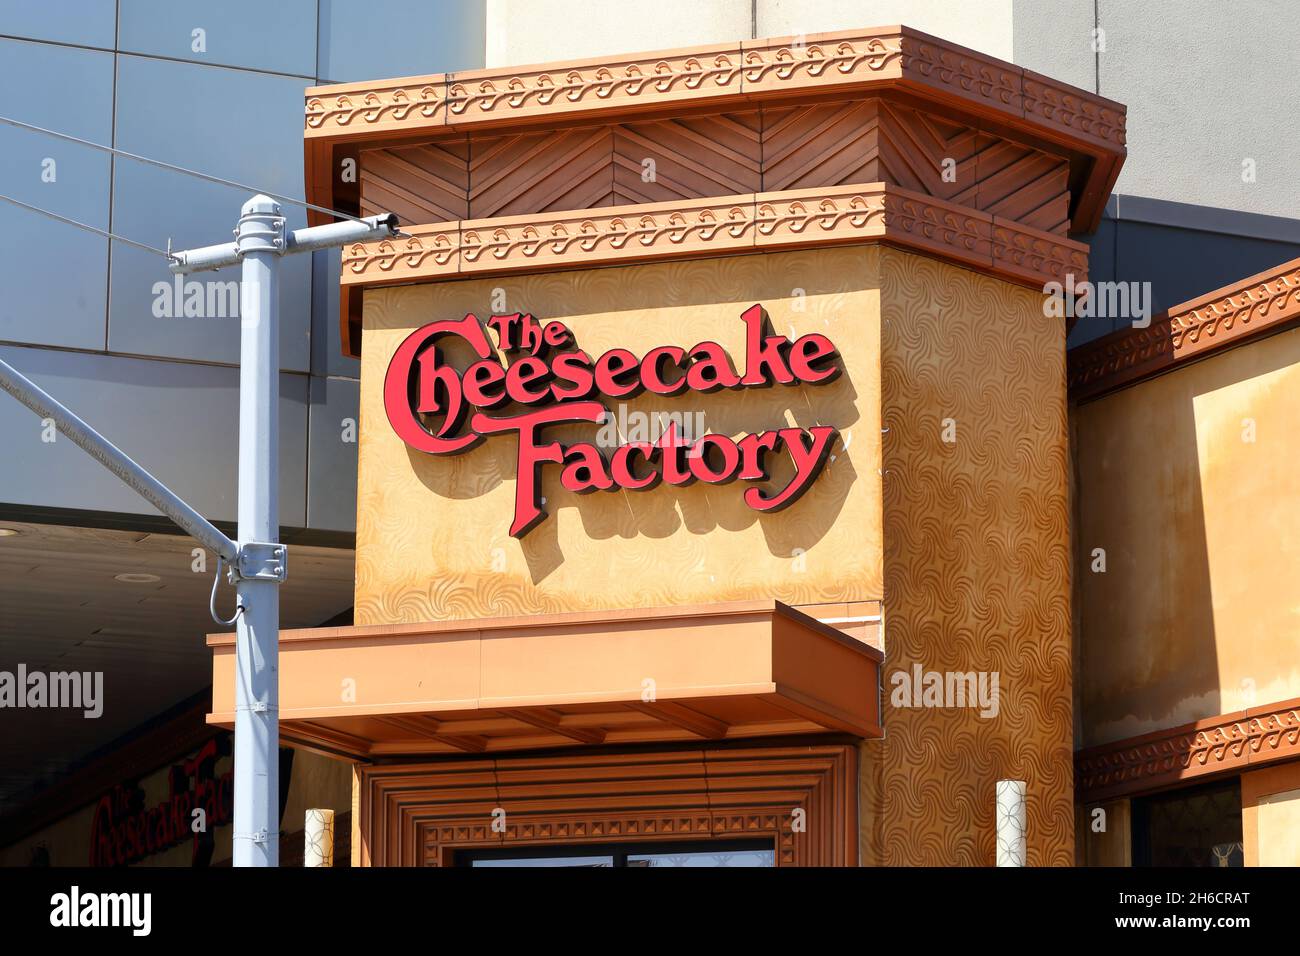 Cheesecake Factory, 90-15 Queens Blvd, Queens, NY. exterior signage of a chain restaurant in the Elmhurst neighborhood. Stock Photo